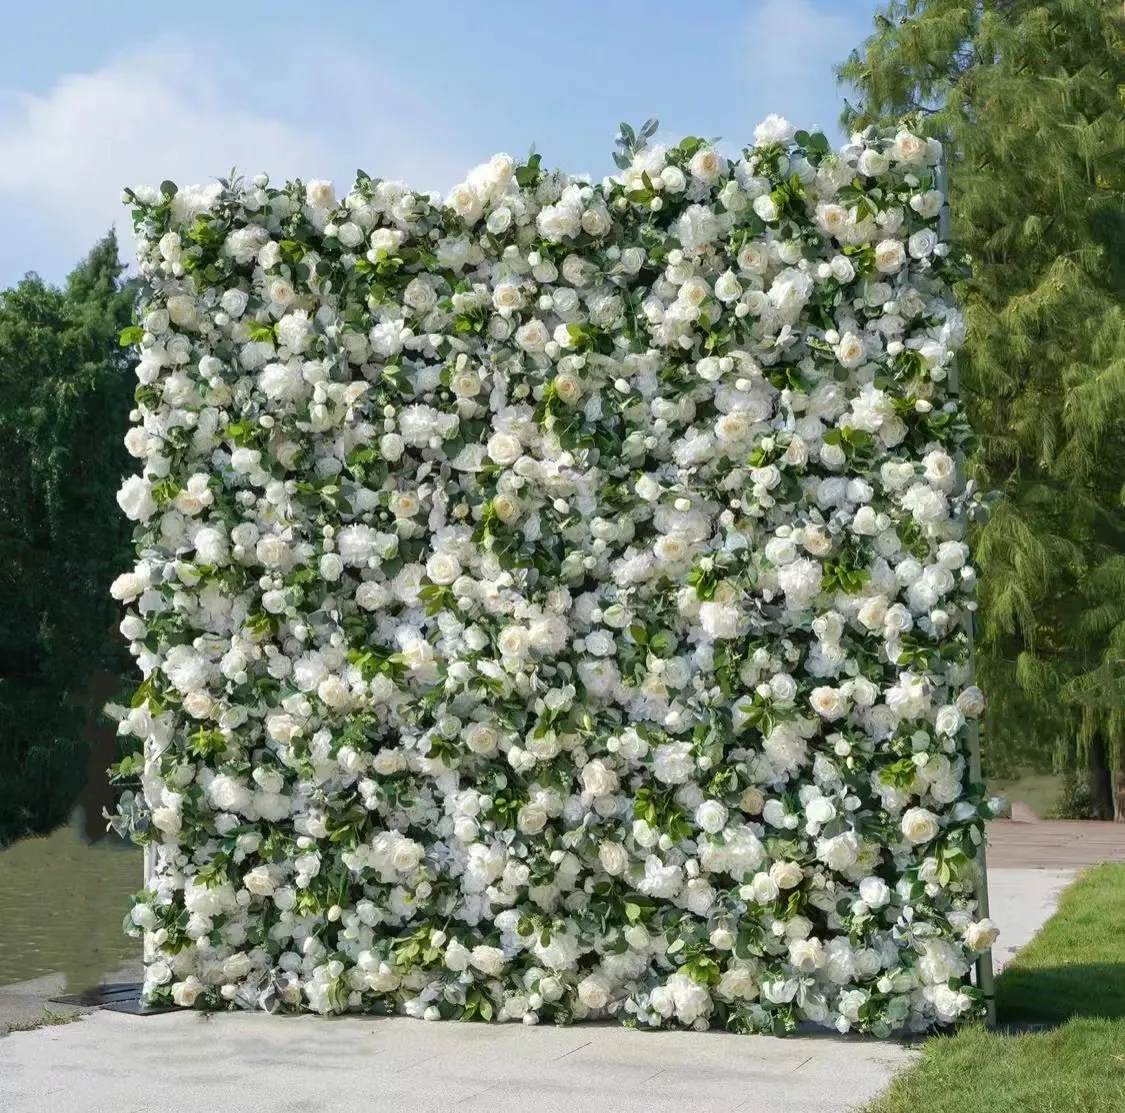 KCFW-312 White Green Flower Wall Greenery Backdrop Artificial Boxwood Hedge Wall Flower Wall Backdrop 8ft x 8ft For Events